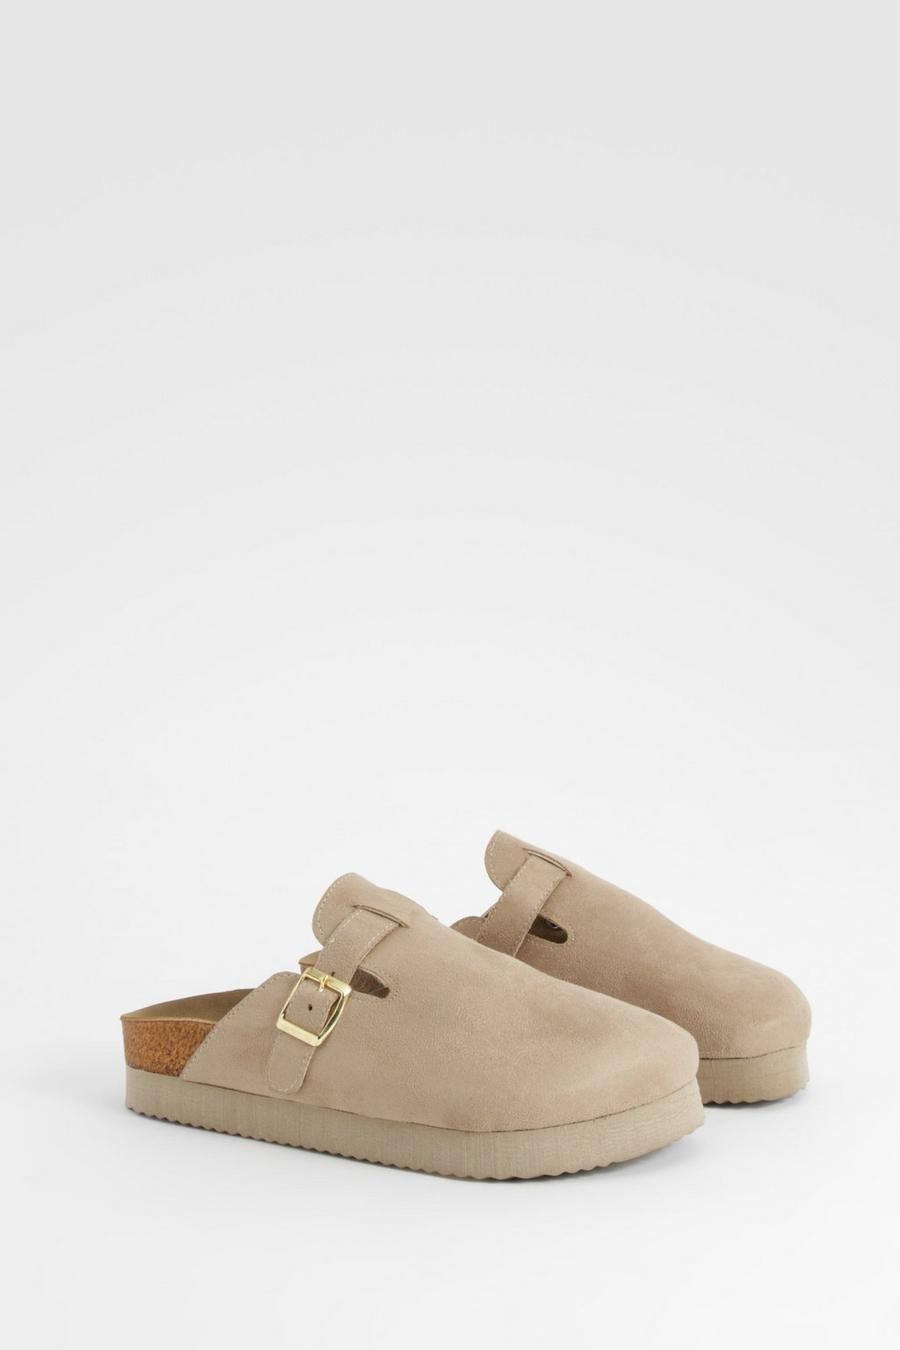 Taupe Flat sandals featuring leather upper with metallic hardware detailing  